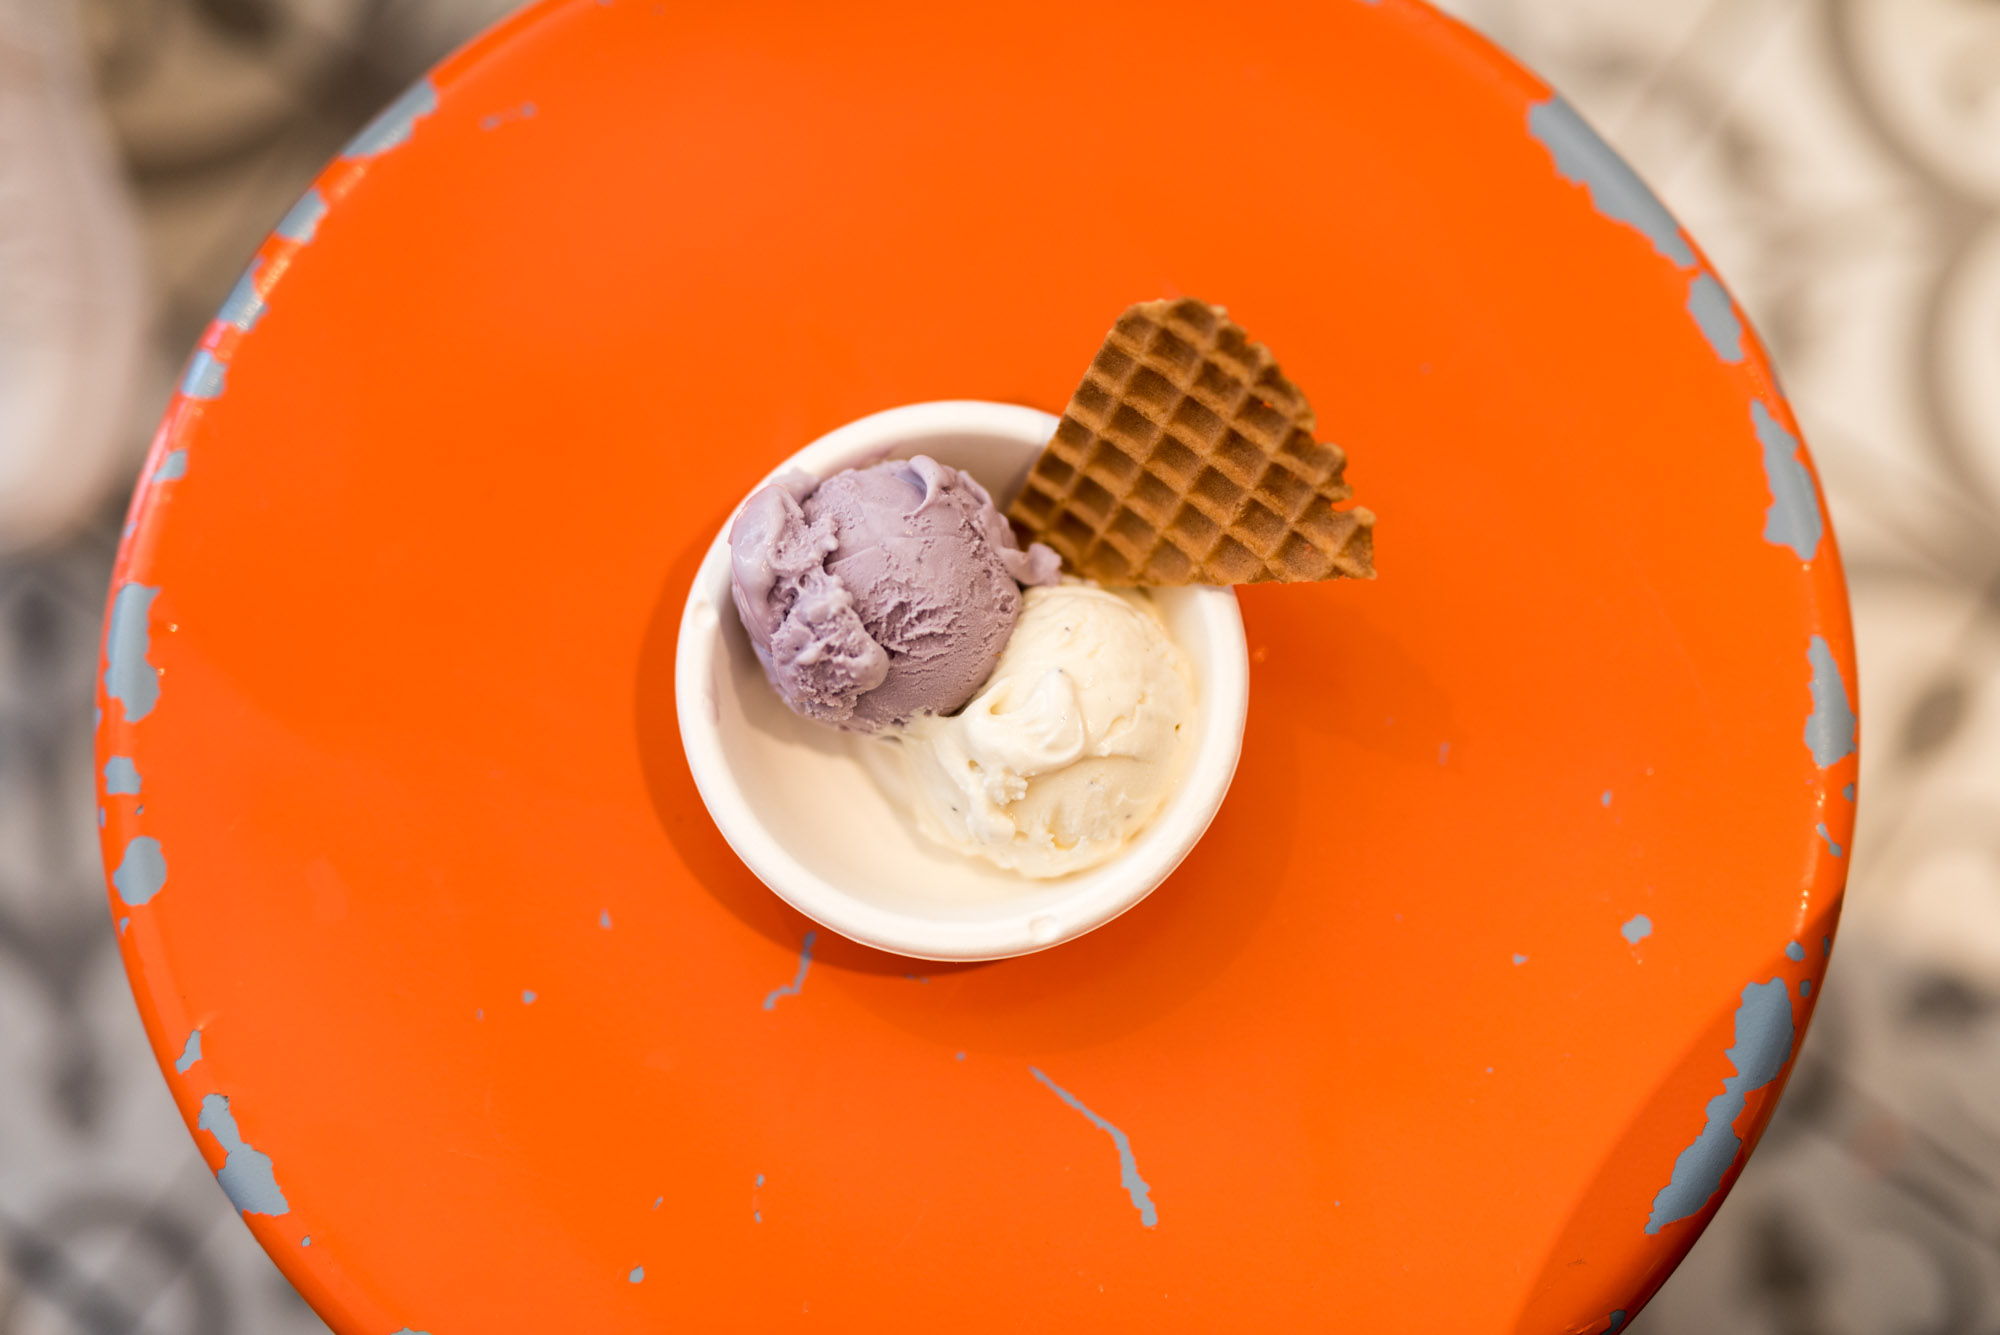 Jeff On The Road - Travel - Chicago - Food - Wicker Park - Jeni's Splendid Ice Cream - All photos are under Copyright © 2017 Jeff Frenette Photography / dezjeff. To use the photos, please contact me at dezjeff@me.com.